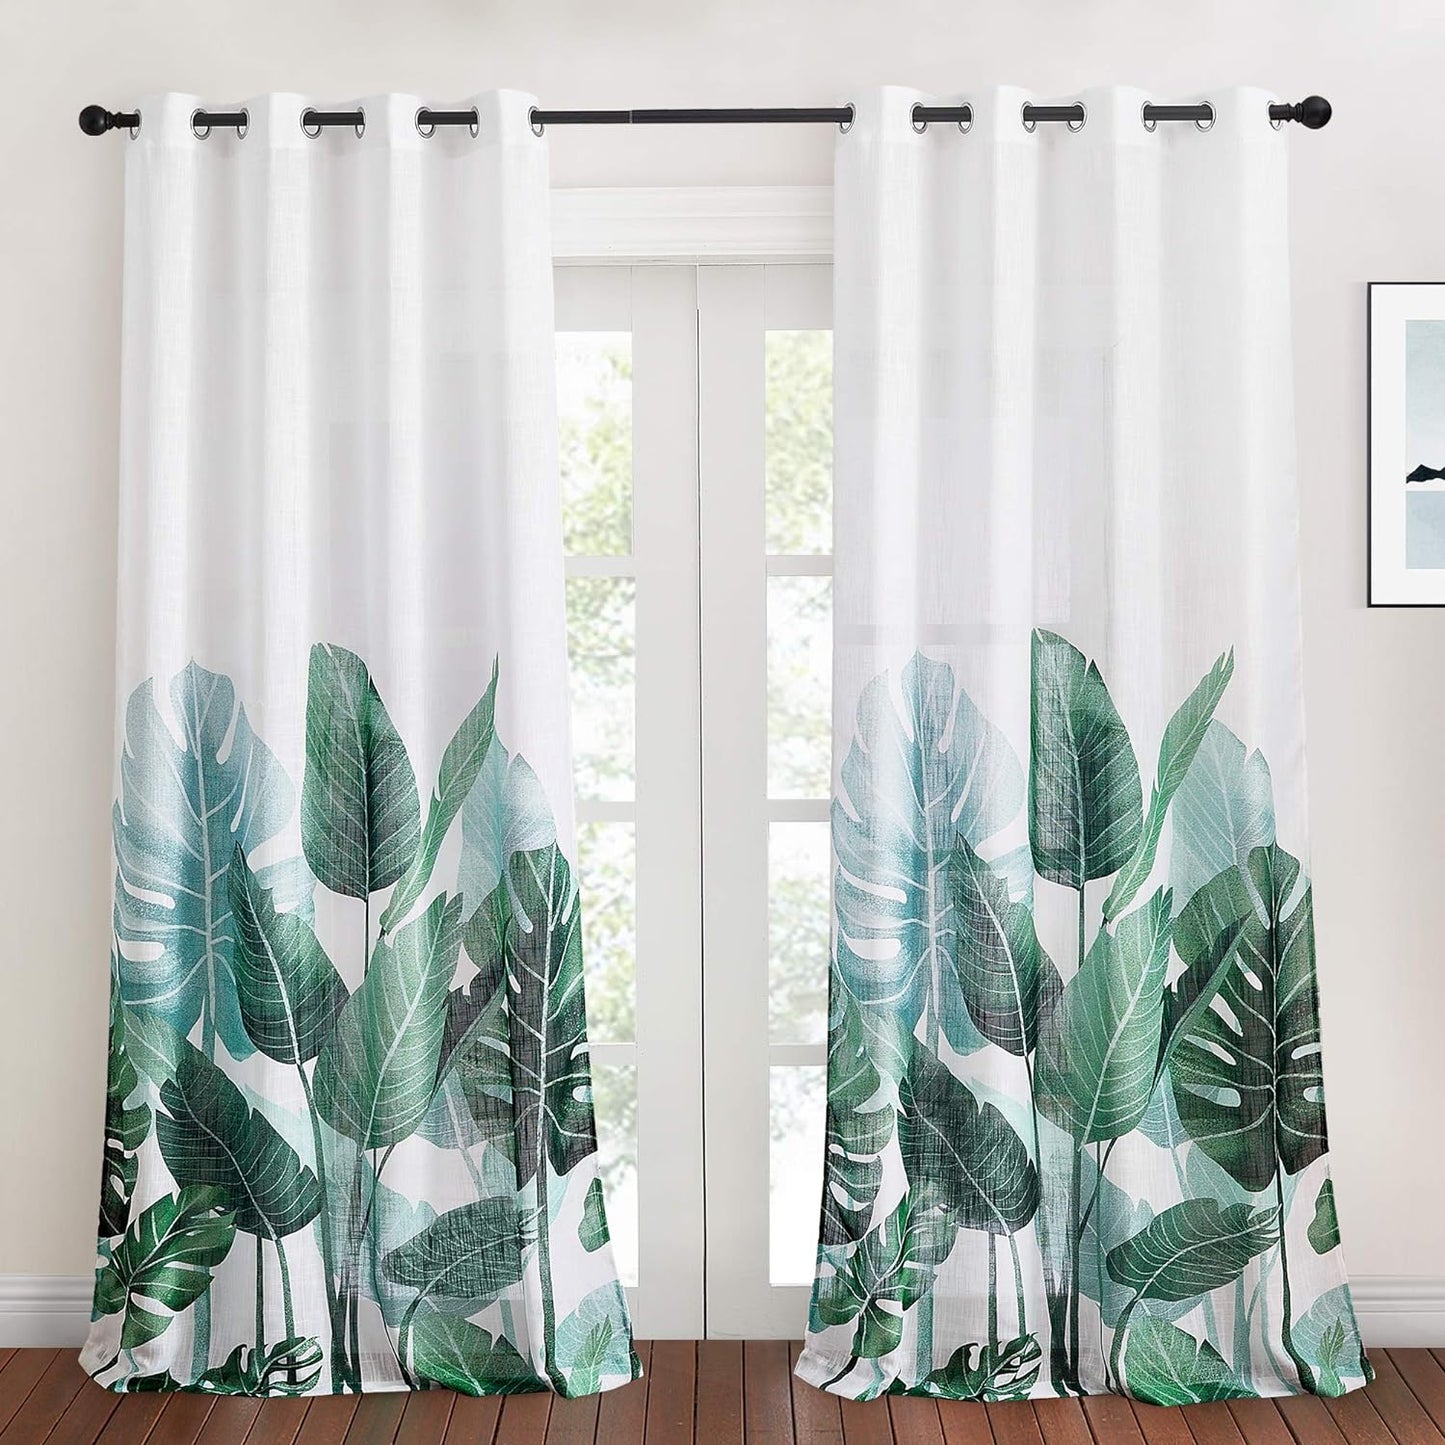 KGORGE Blackout Curtains for Bedroom, Farmhouse Tripical Leaves Pattern Curtains & Drapes Insulating Privacy Window Treatment for Dining Living Room Office Studio, W52 X L63 Inch, 2 Panels  KGORGE Linen W50 X L95 | Pair 